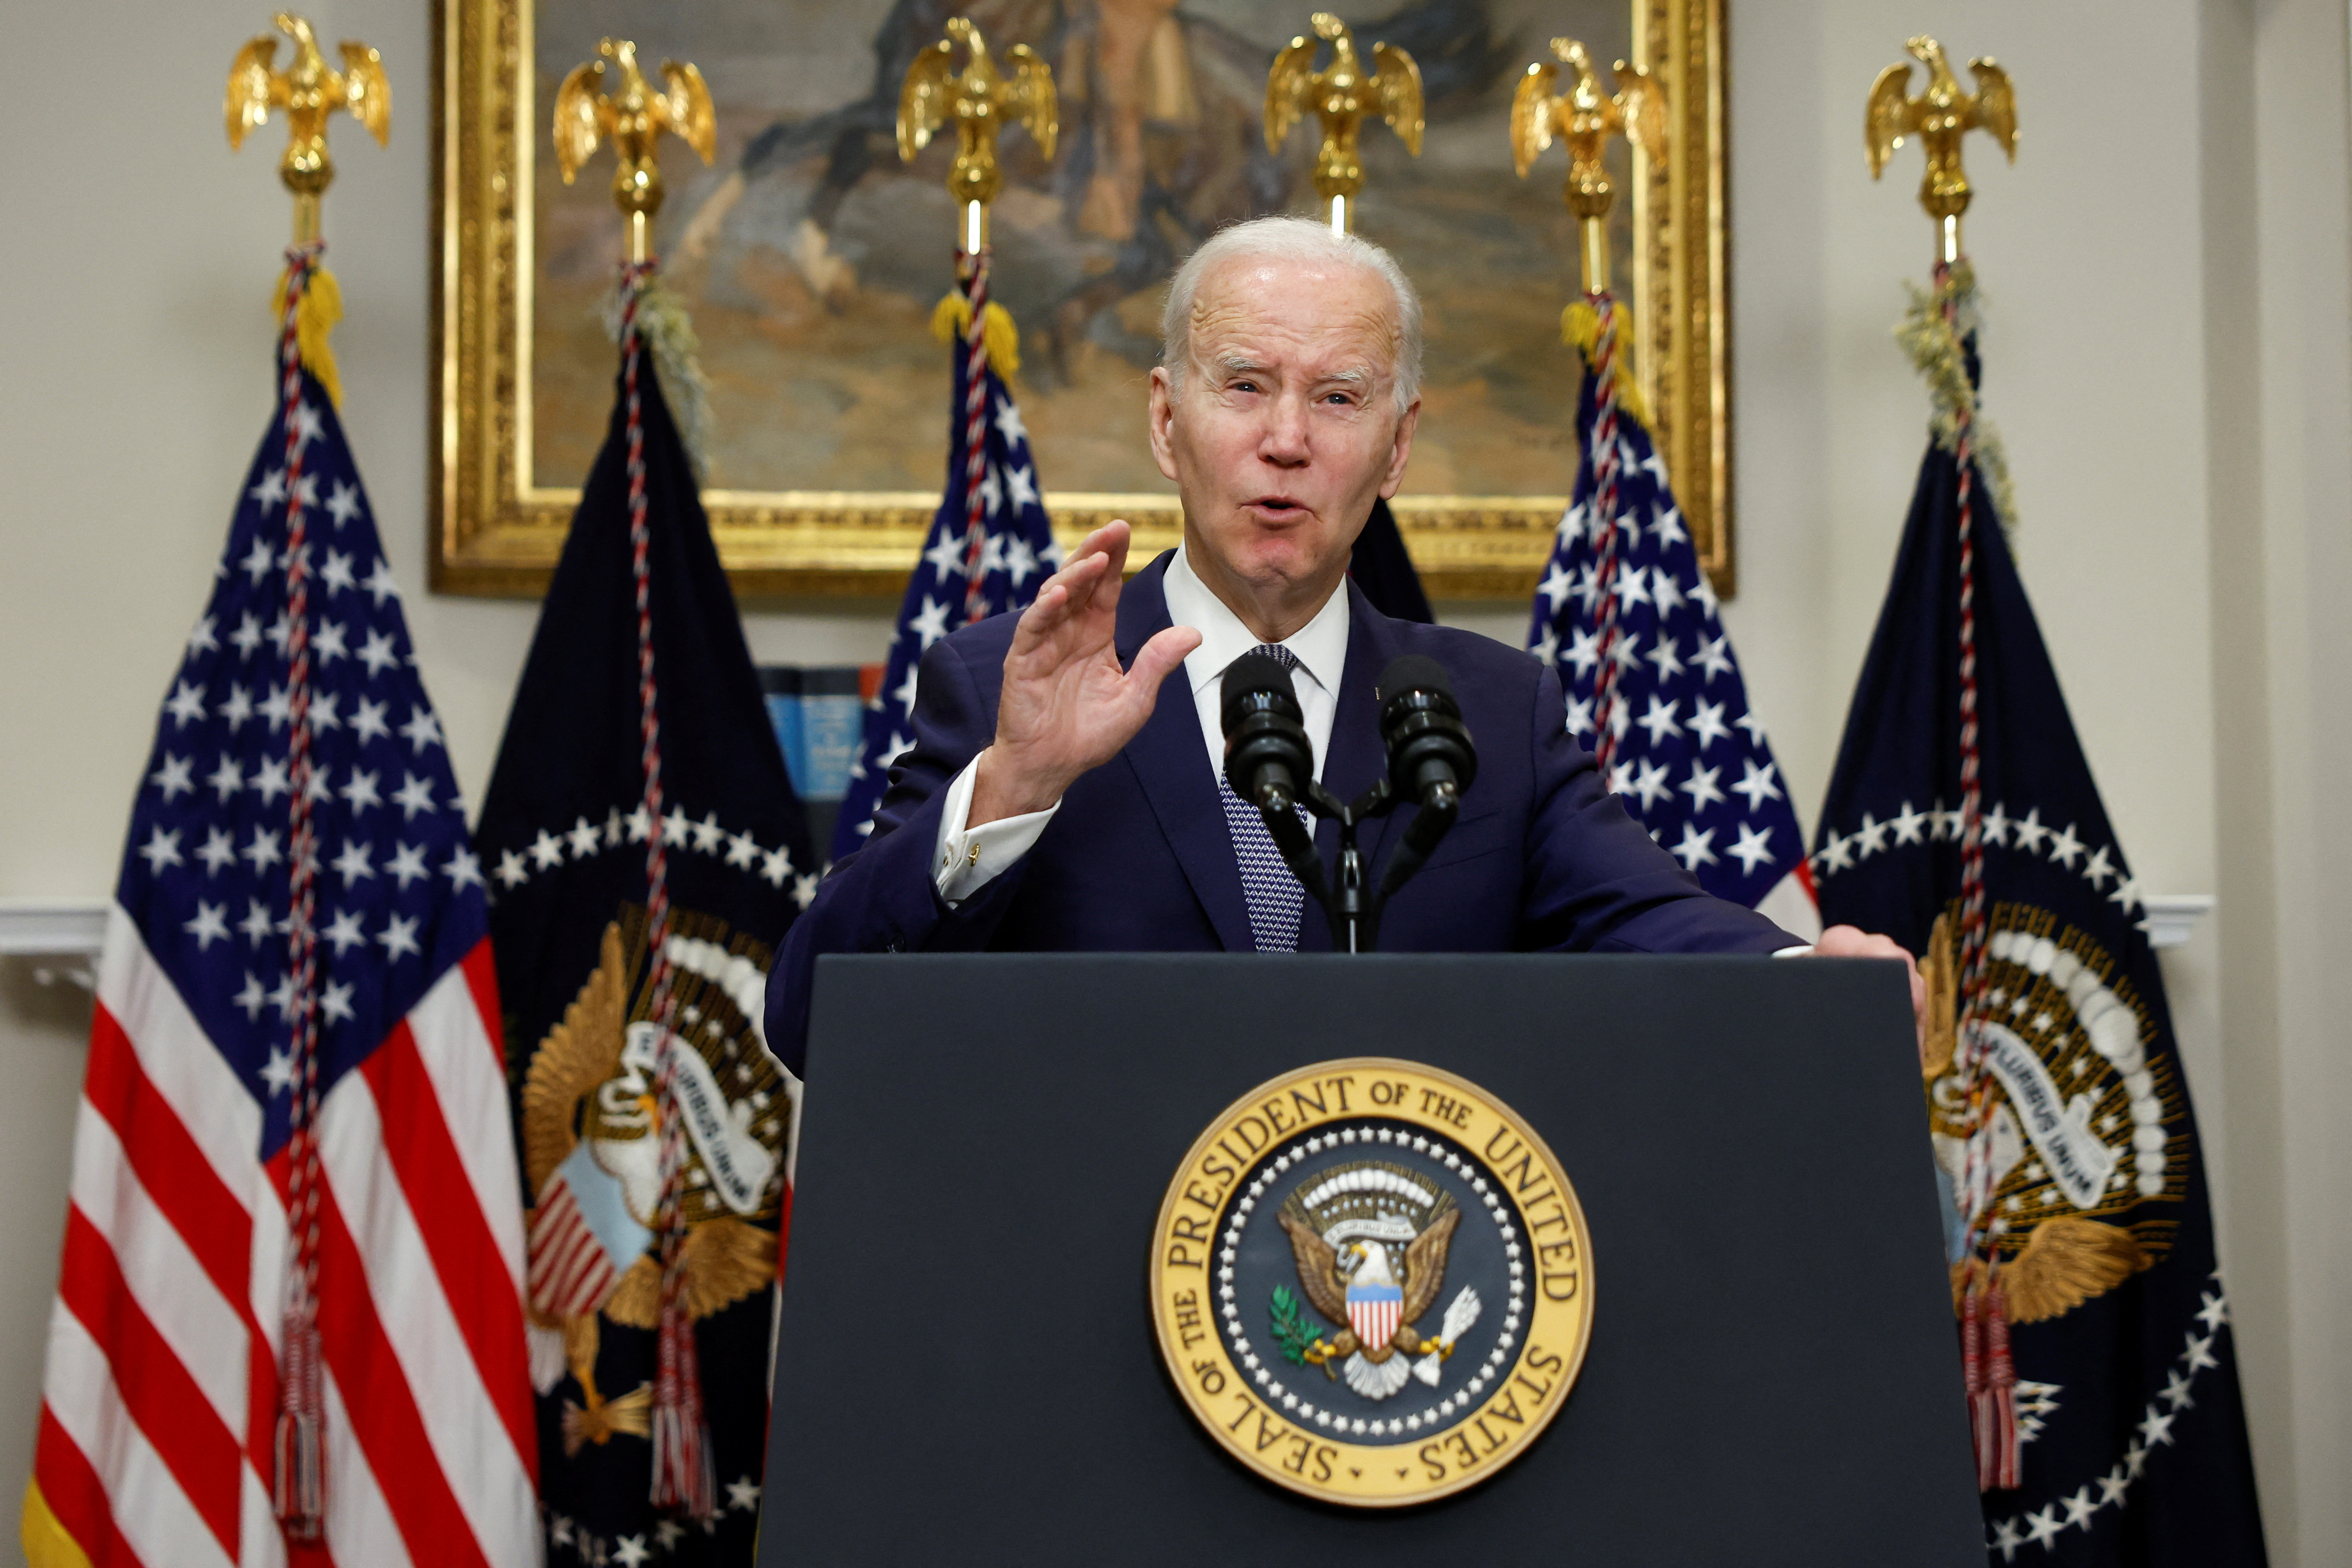 U.S. President Joe Biden delivers remarks on the banking crisis after the collapse of Silicon Valley Bank (SVB) and Signature Bank, in the Roosevelt Room at the White House in Washington, D.C., U.S. March 13, 2023.